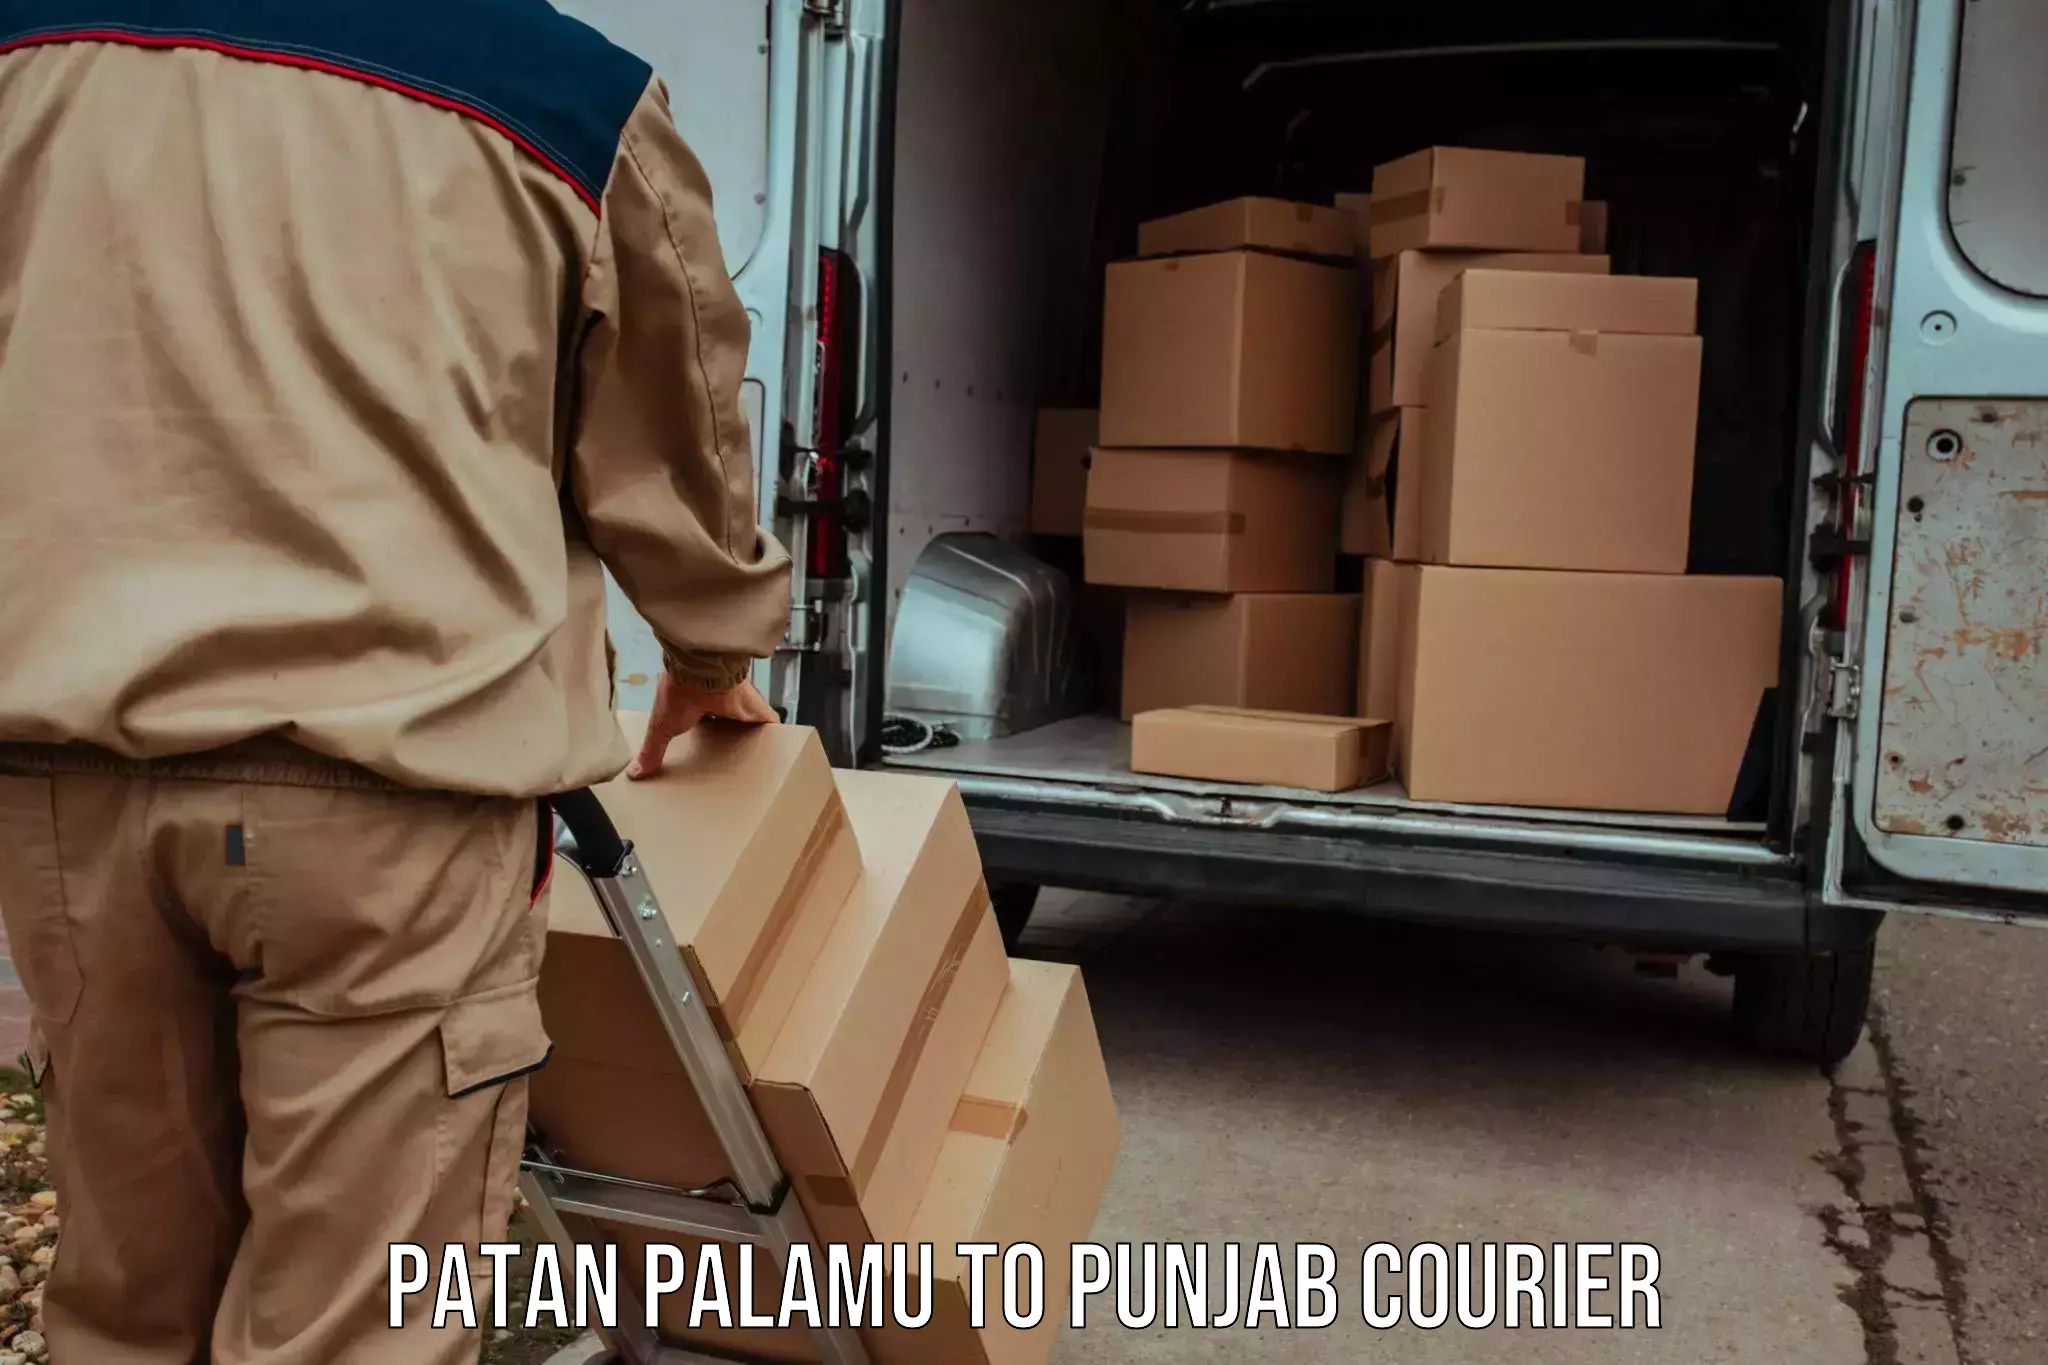 Next-day delivery options Patan Palamu to Mehta Chowk